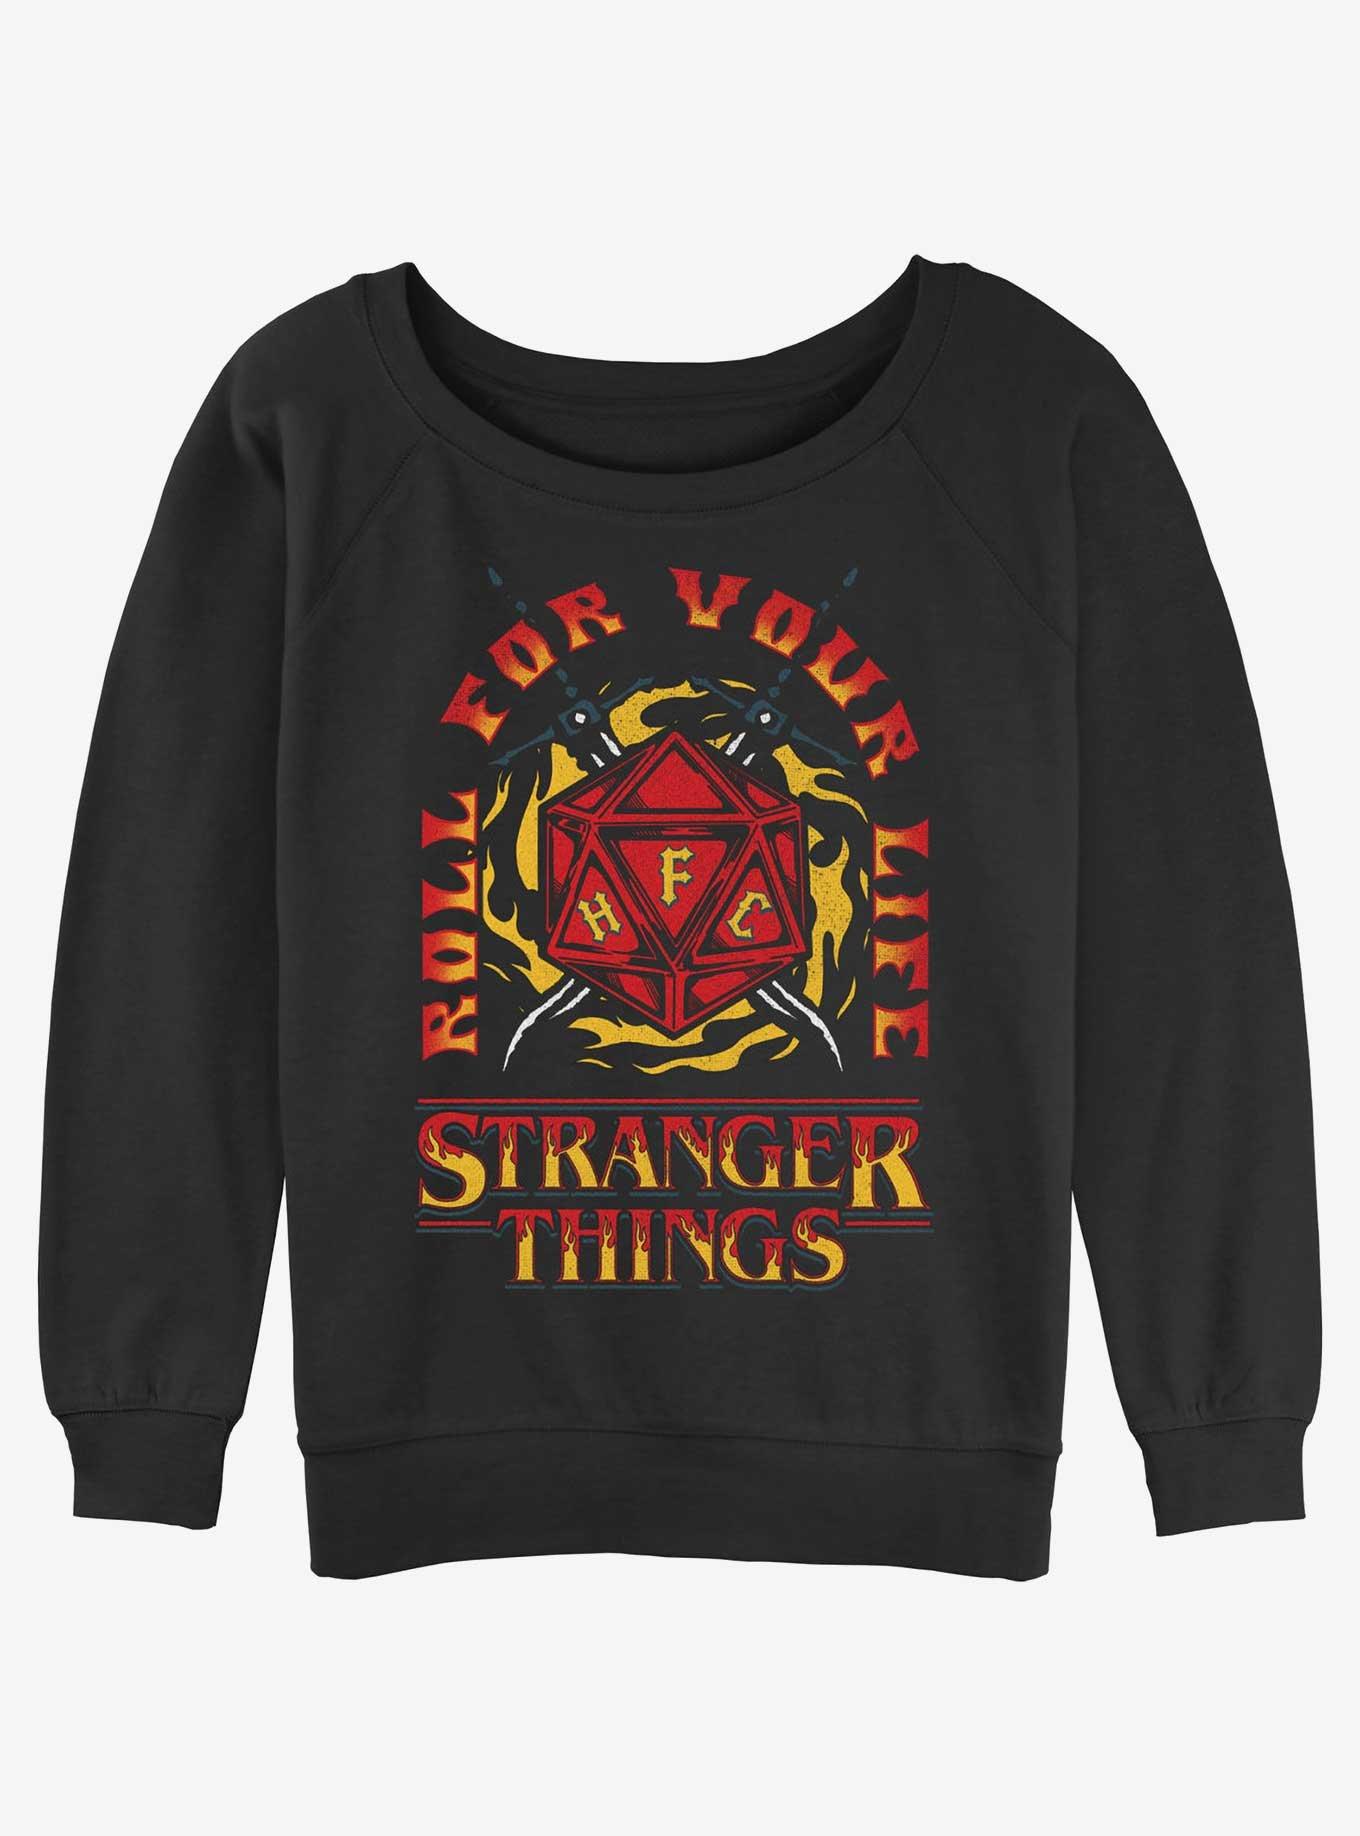 Stranger Things Fire and Dice Girls Slouchy Sweatshirt